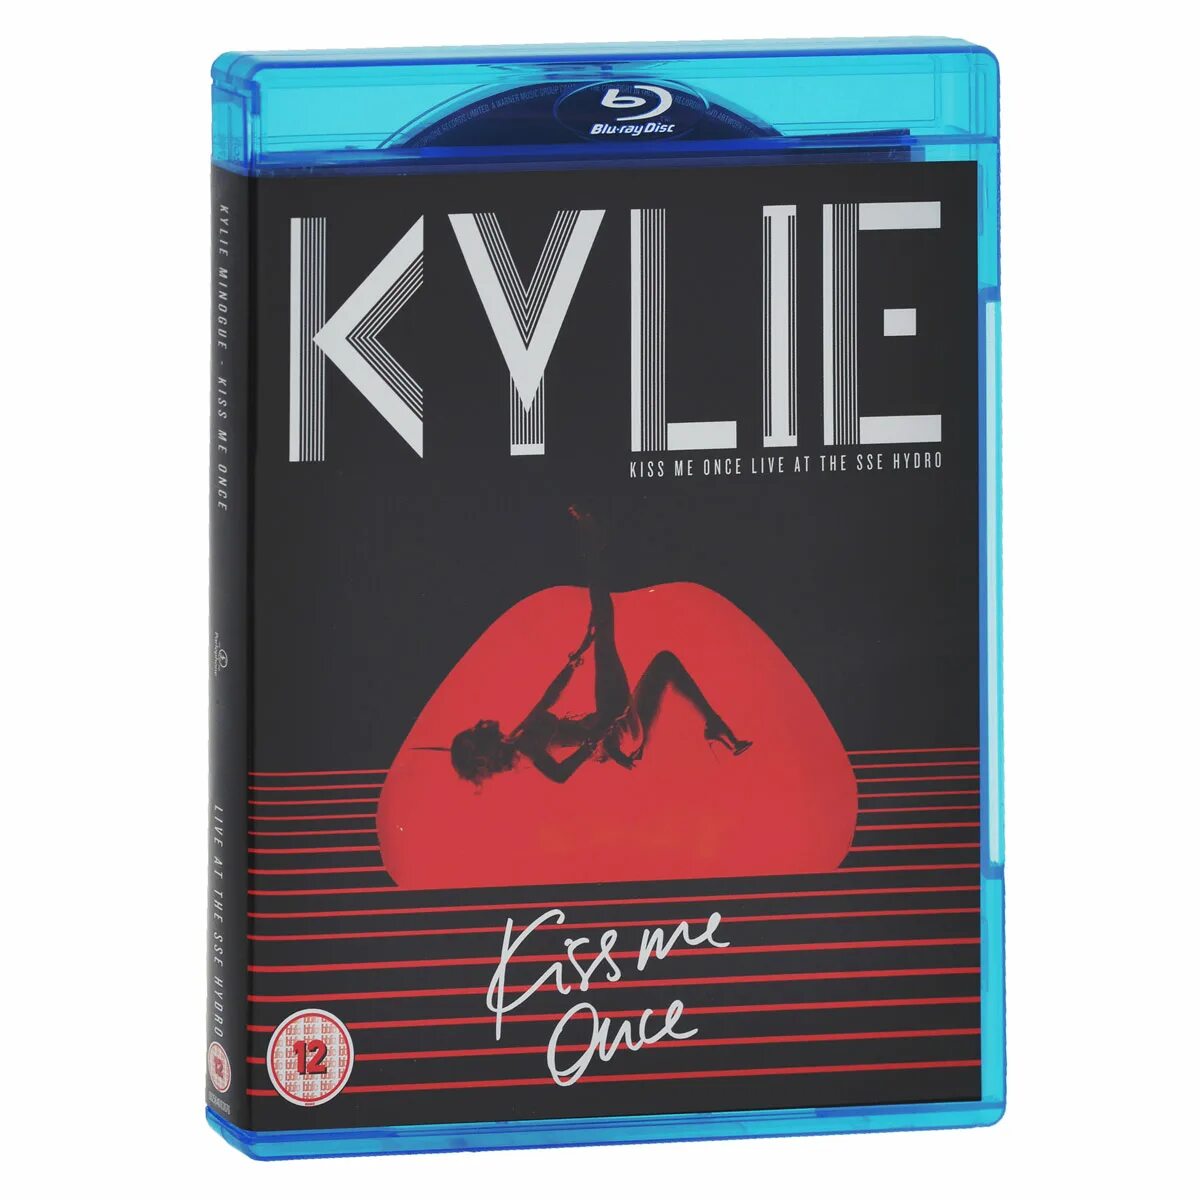 Once купить. Kiss me once Live at the SSE Hydro Kylie Minogue. Kylie Kiss me once. Kiss me once - Live at the SSE Hydro. Kylie Minogue Kiss me once DVD.